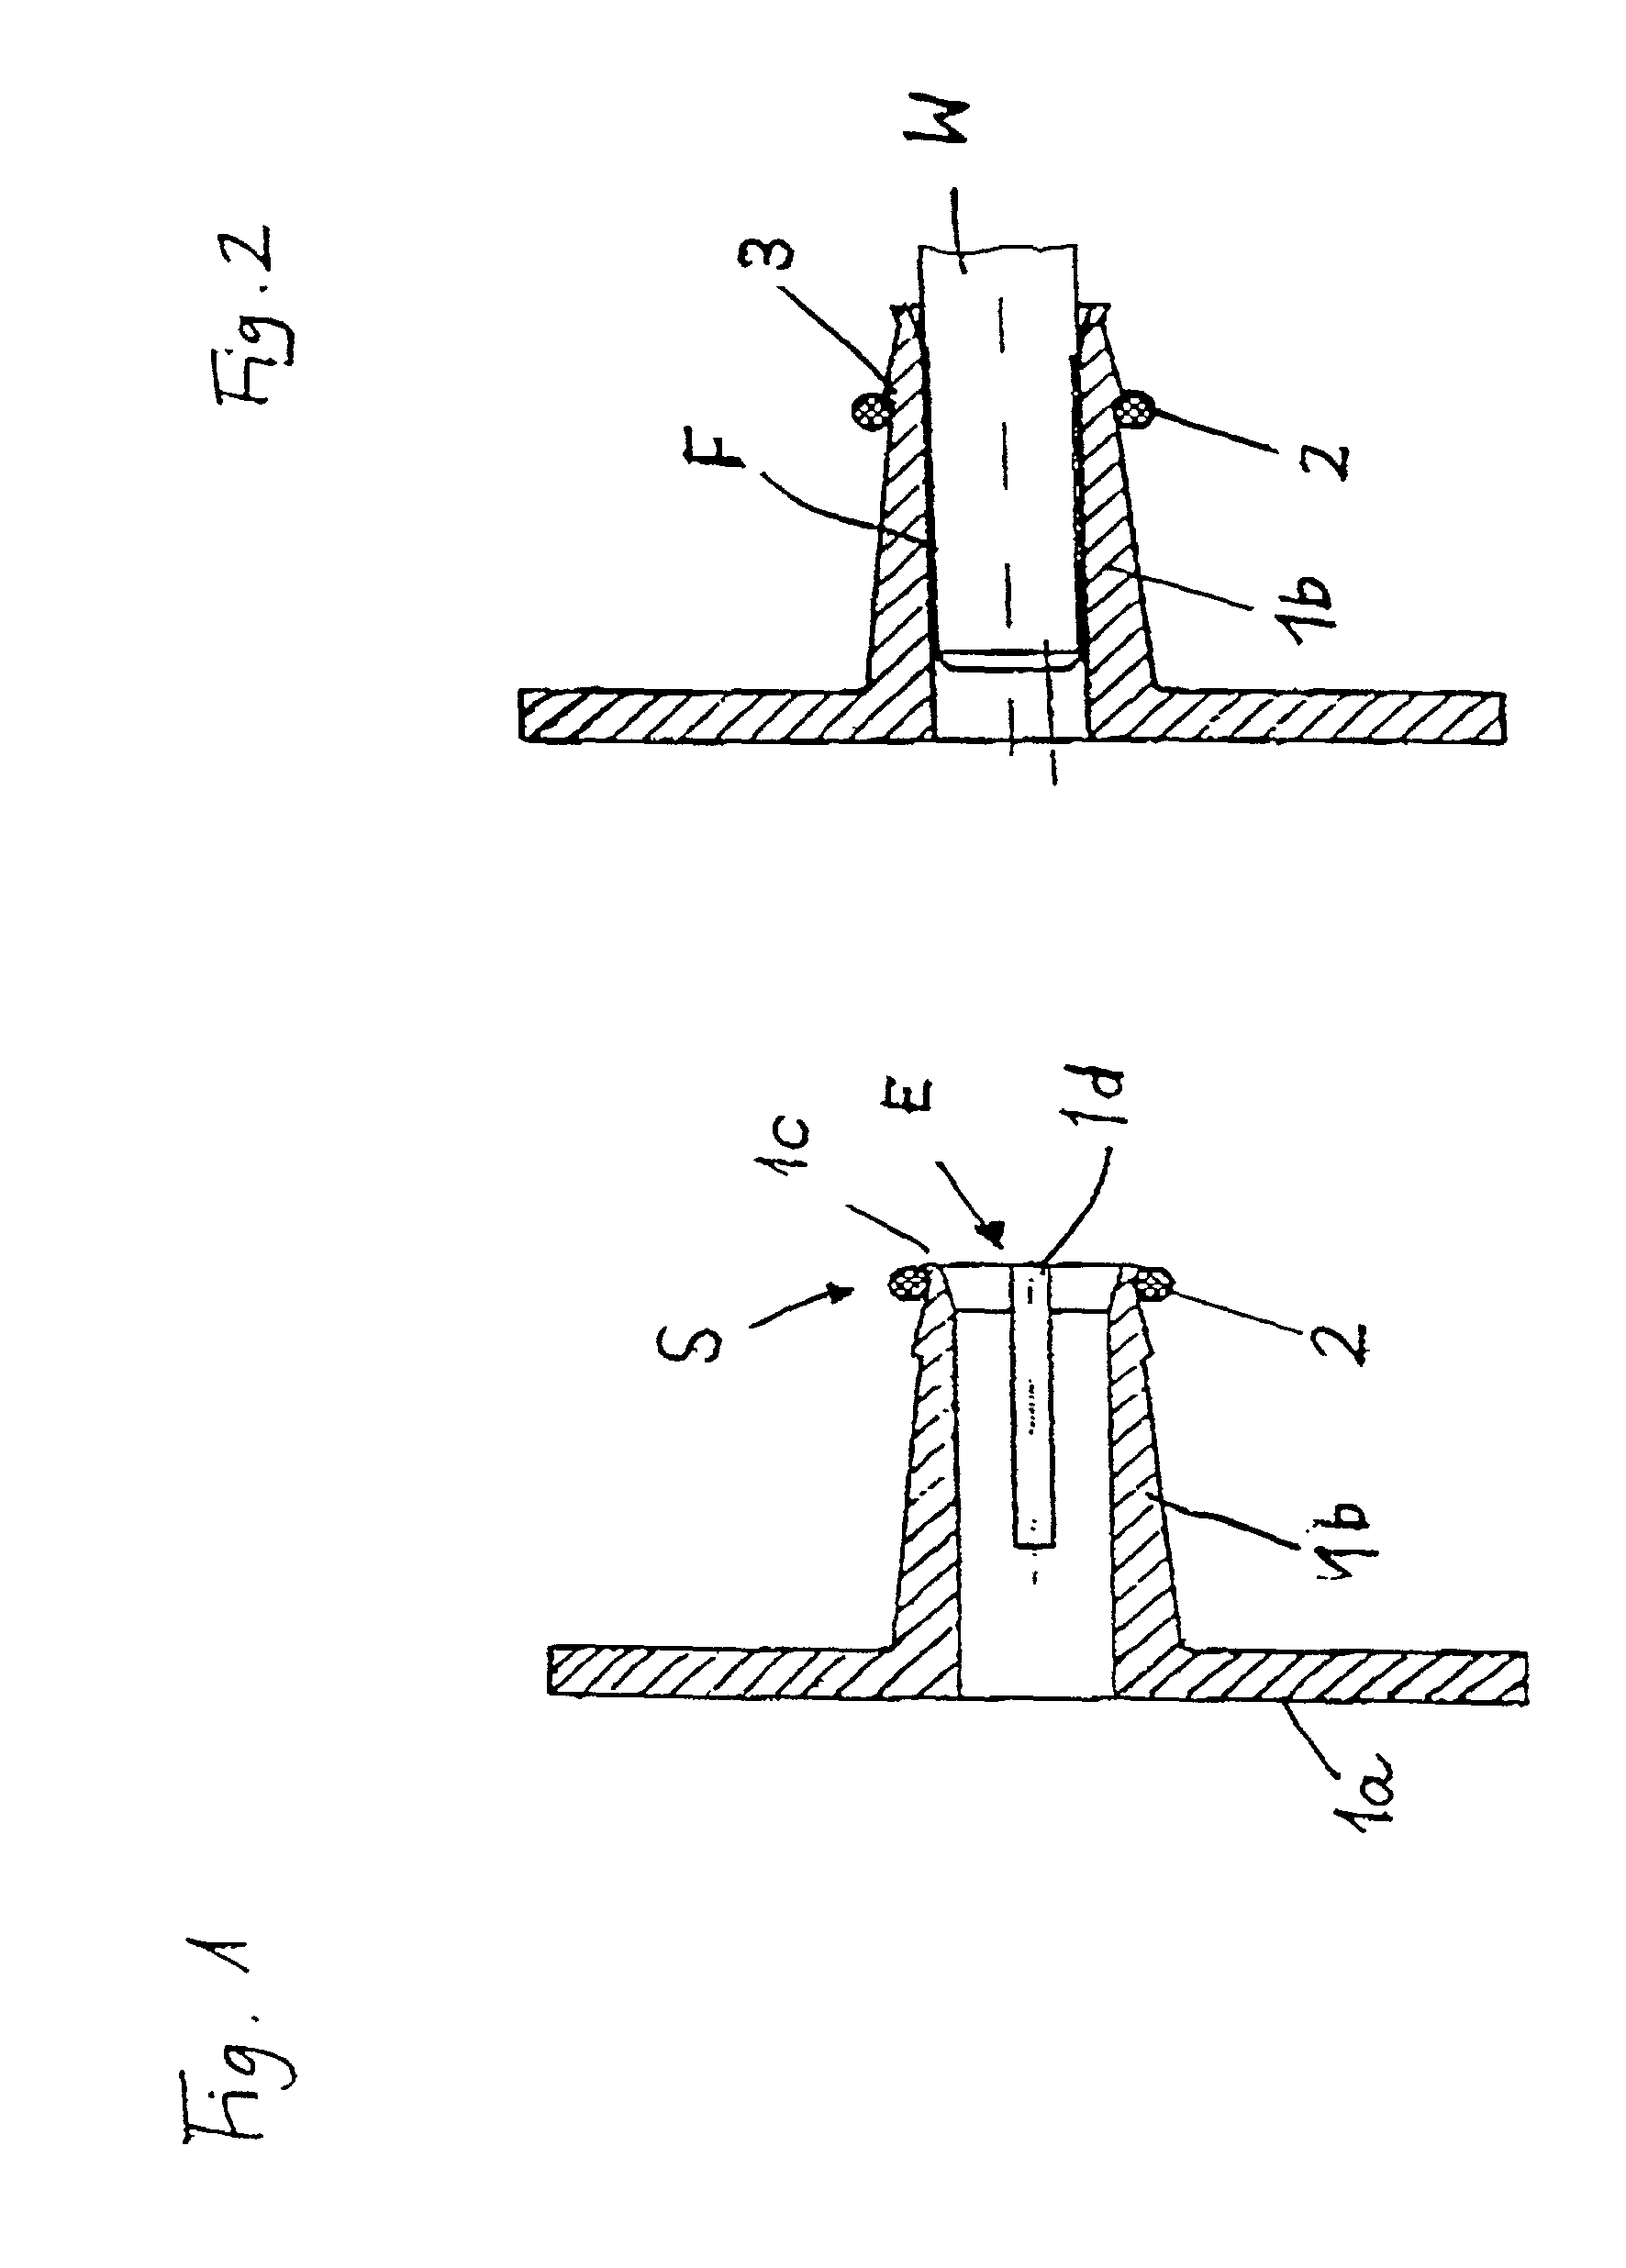 Self-centering timing disk hub and method of mounting the same